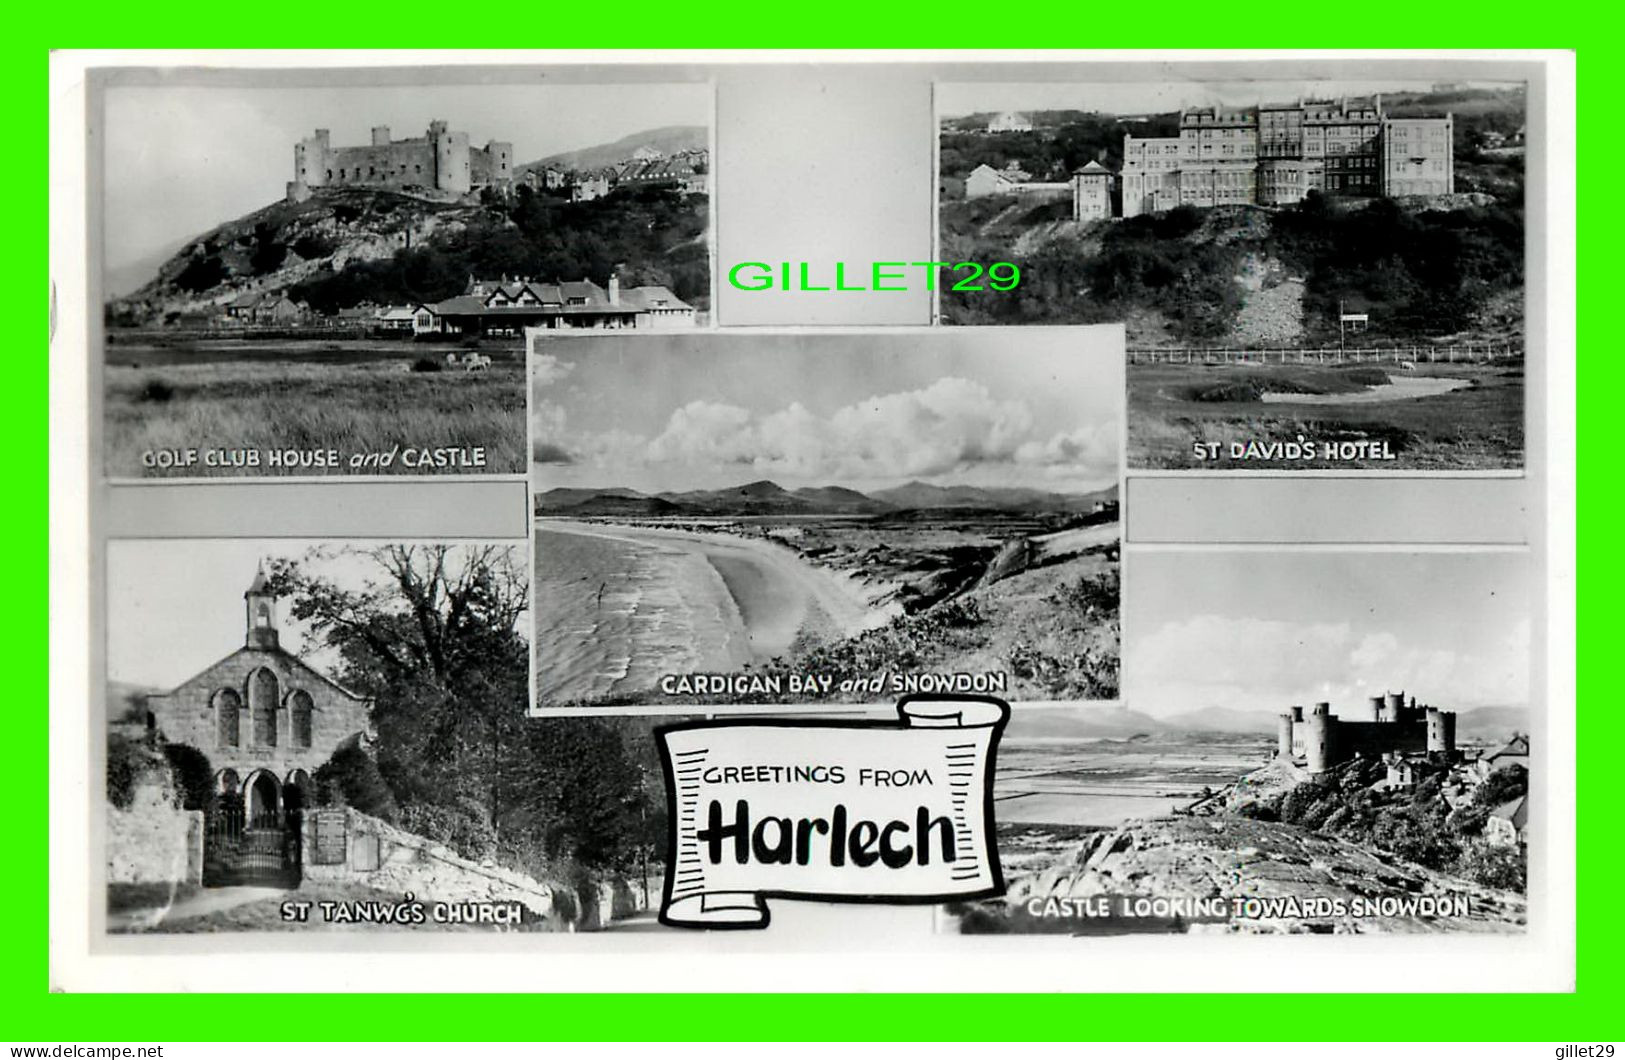 HARLECH, MERIONETHSHIRE, WALES - 6 MULTIVUES - TRAVEL IN 1962 - PUB. BY HARVEY BARTON & SON LTD - - Merionethshire